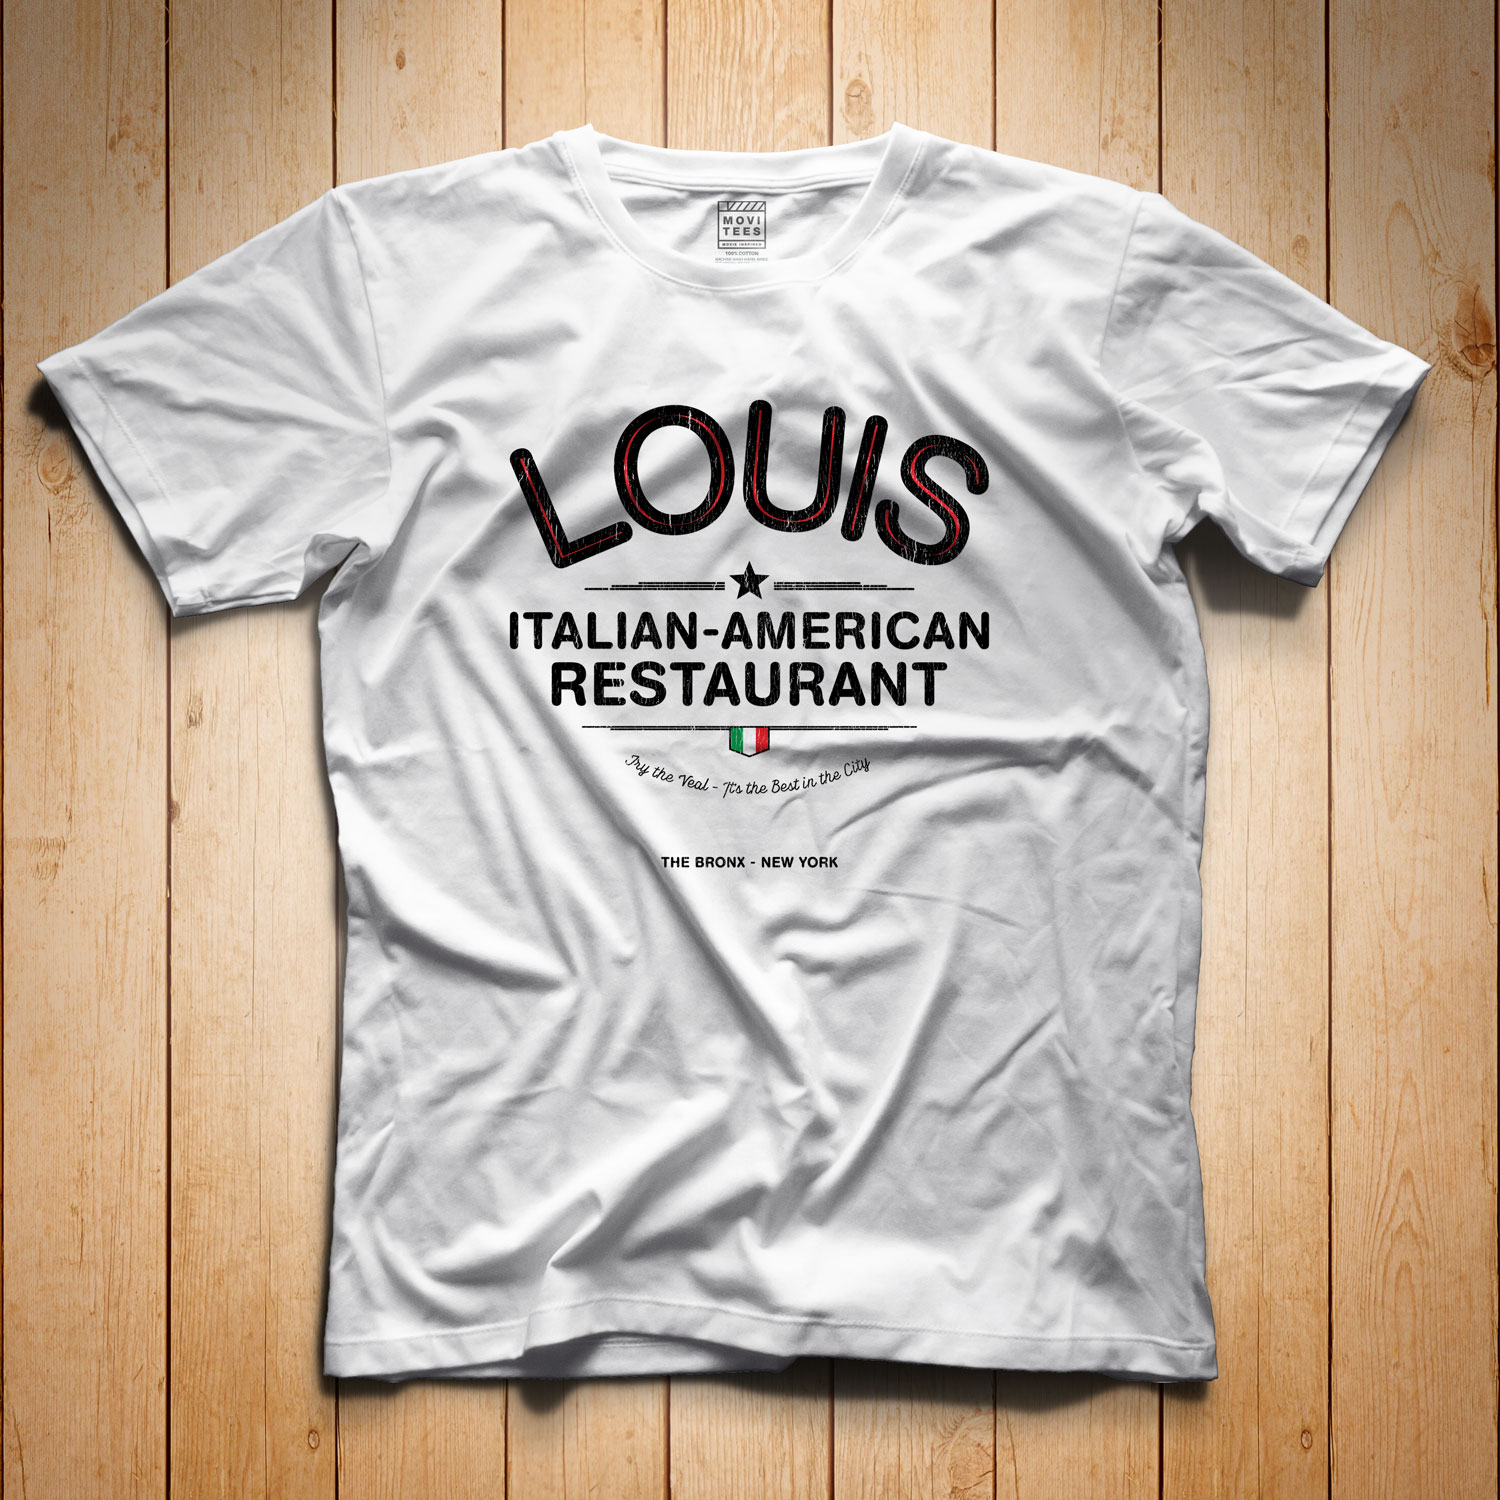 Louis Restaurant T-Shirt inspired by The Godfather - Regular T